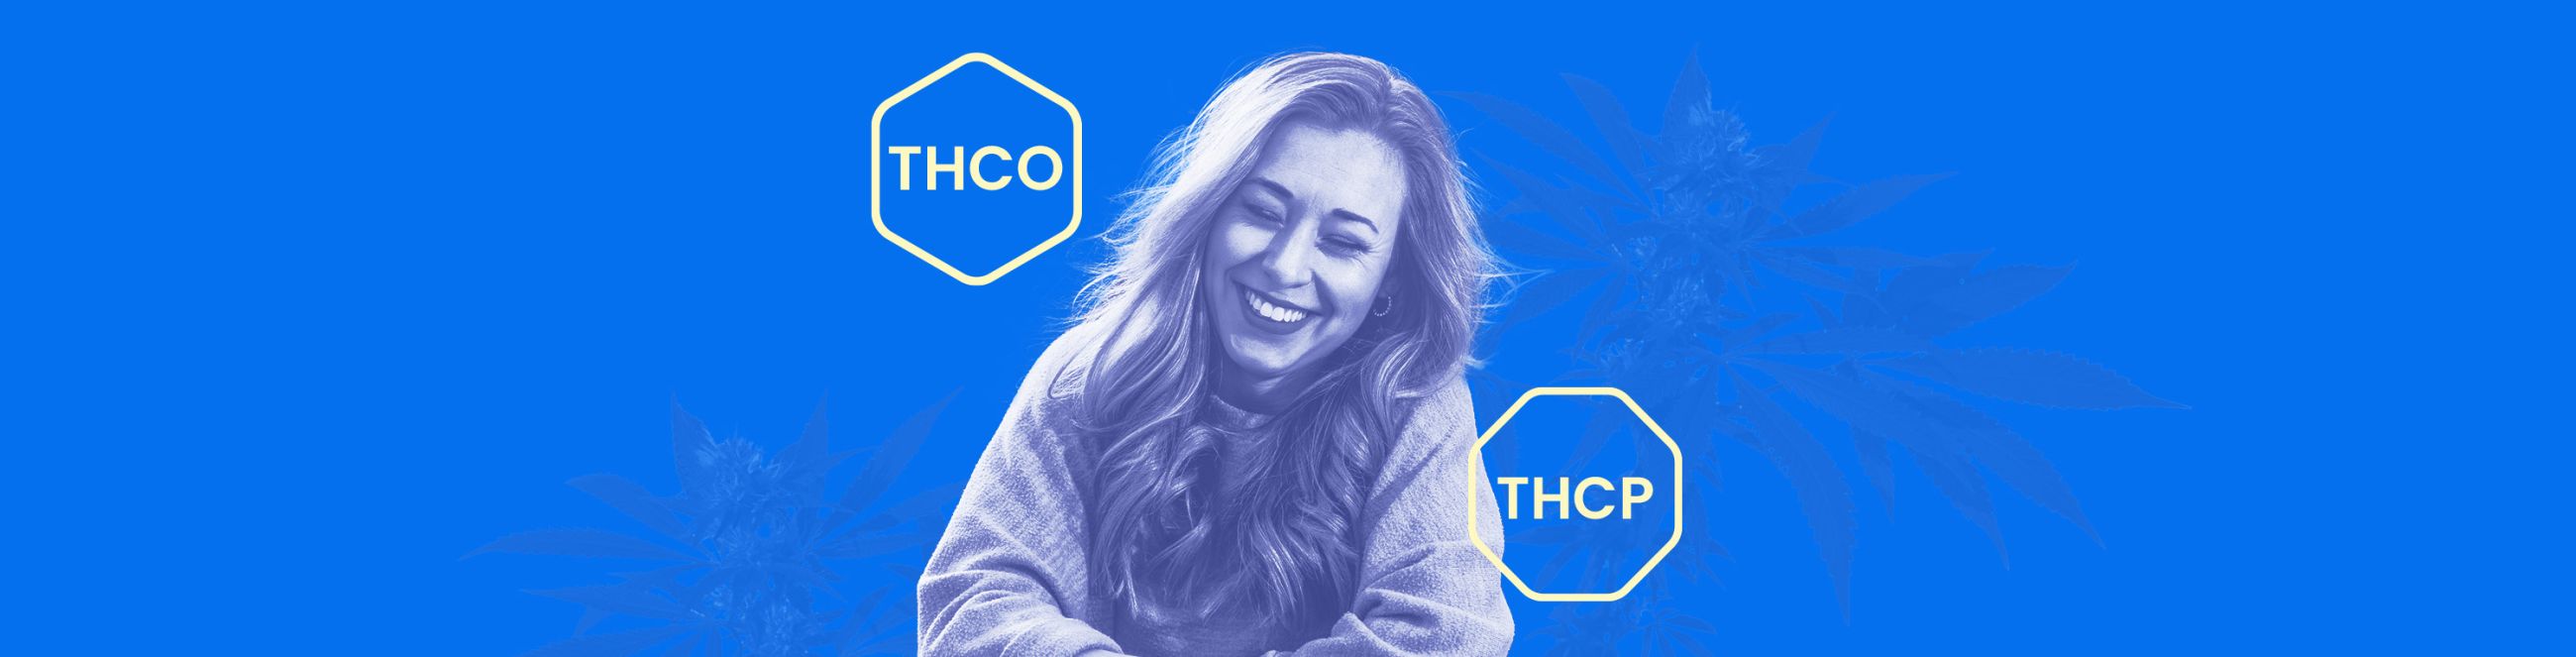 THC-O vs. THCP: Benefits, Differences, & Effects